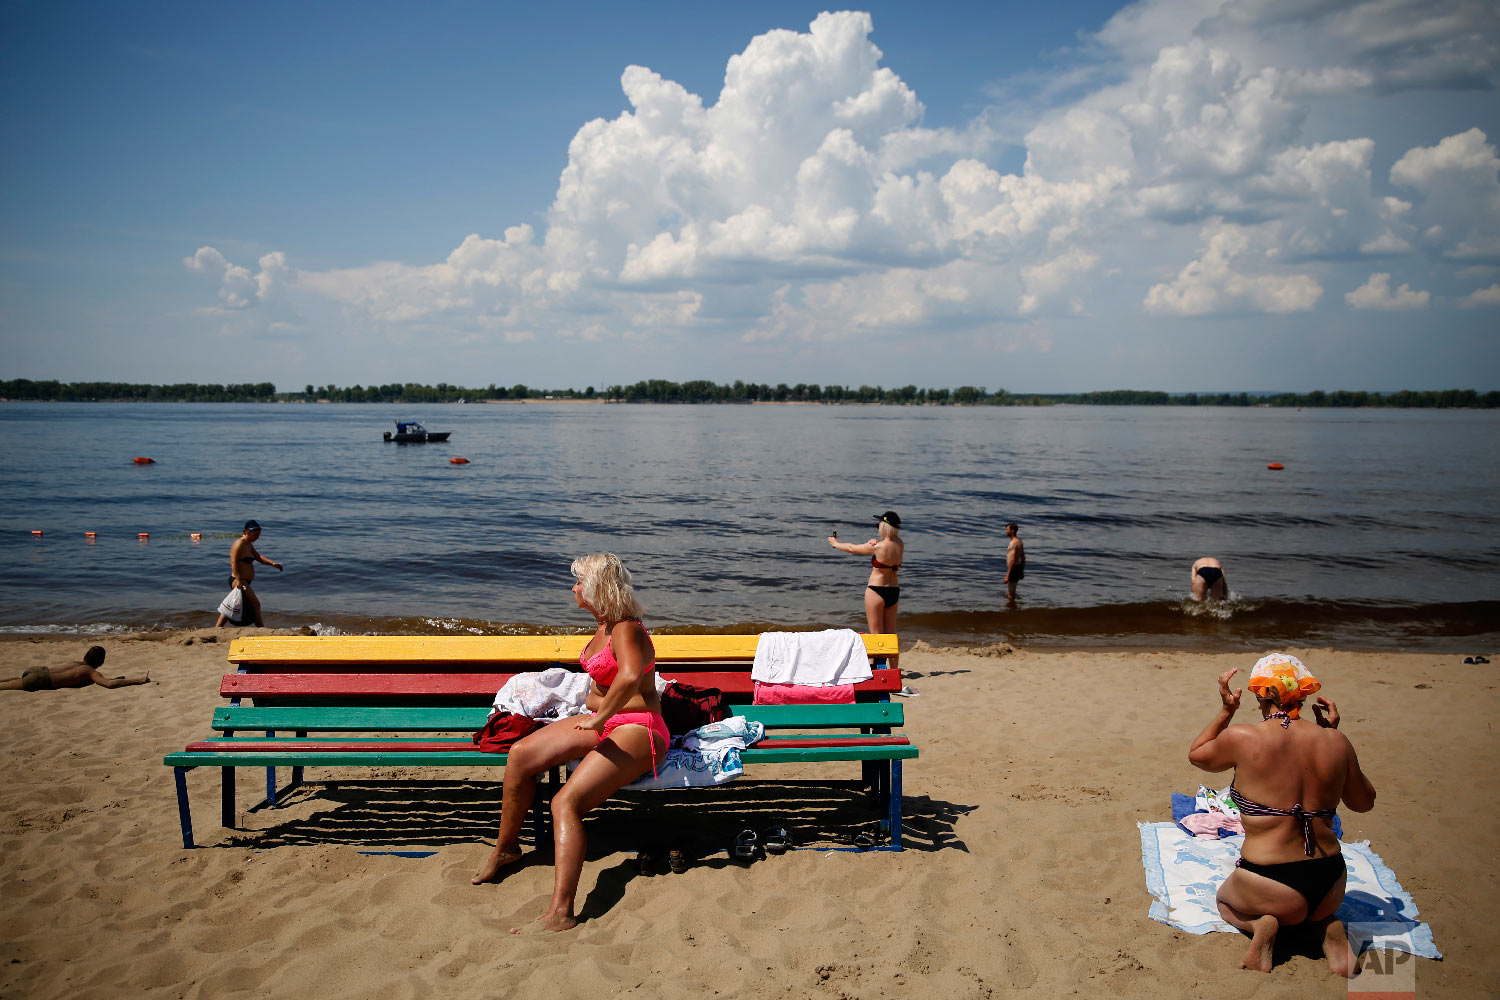  People spend a sunny day on a riverfront beach, during the 2018 soccer World Cup in Samara, Russia on June 26, 2018. (AP Photo/Rebecca Blackwell) 